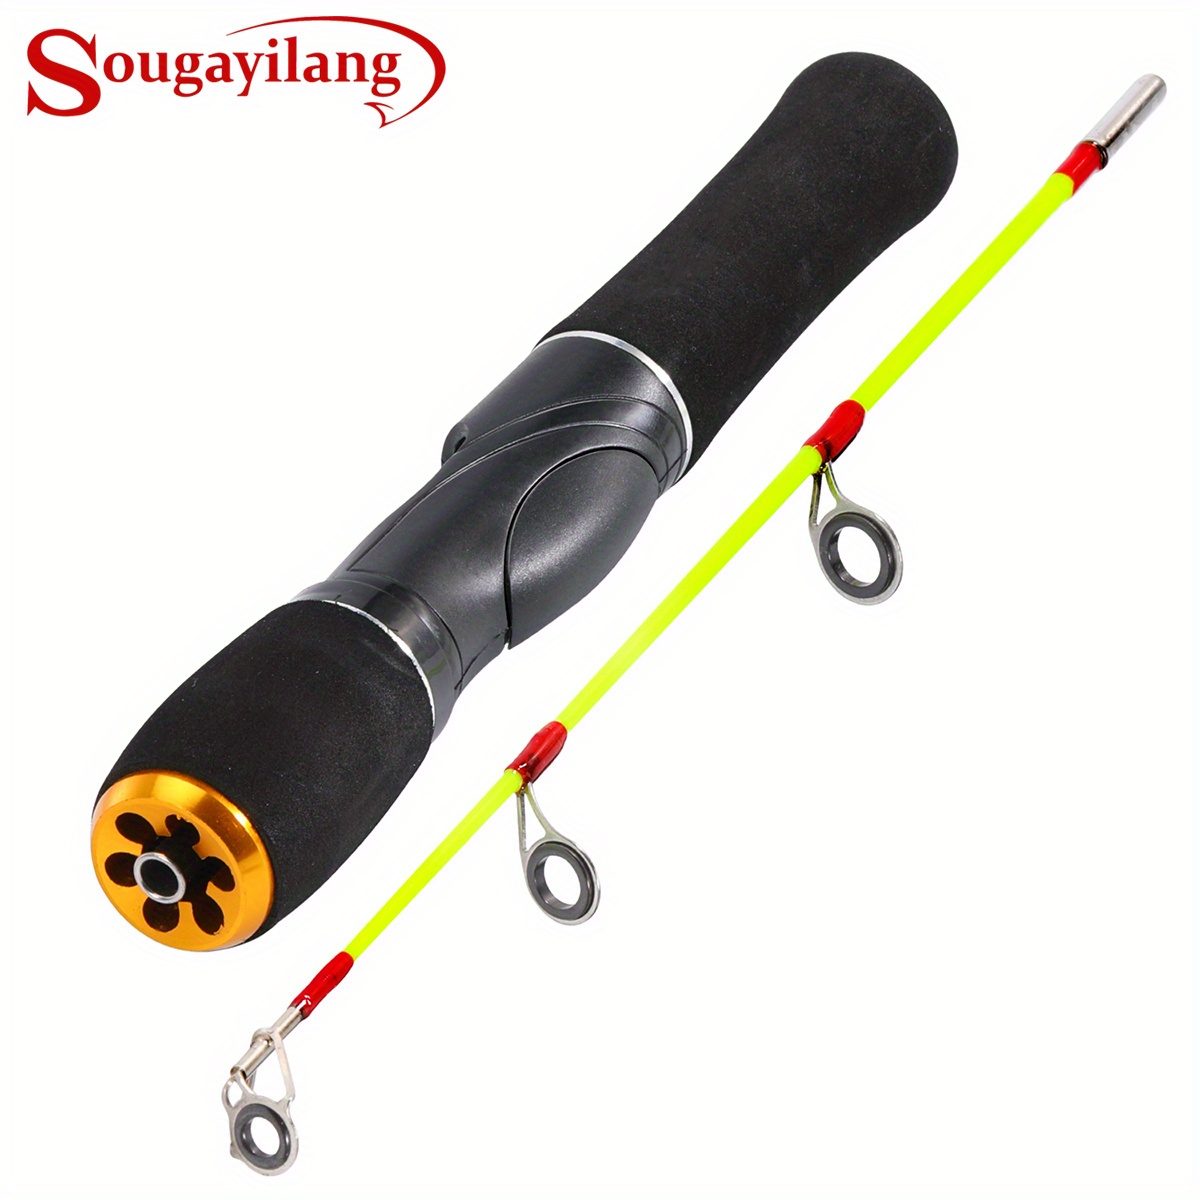 Sougayilang Carbon Spinning Fishing Rod And Reel Combo - 2.1m/6.9ft With  EVA Handle, 5.2:1 Gear Ratio, For Travel, Saltwater And Freshwater Fishing